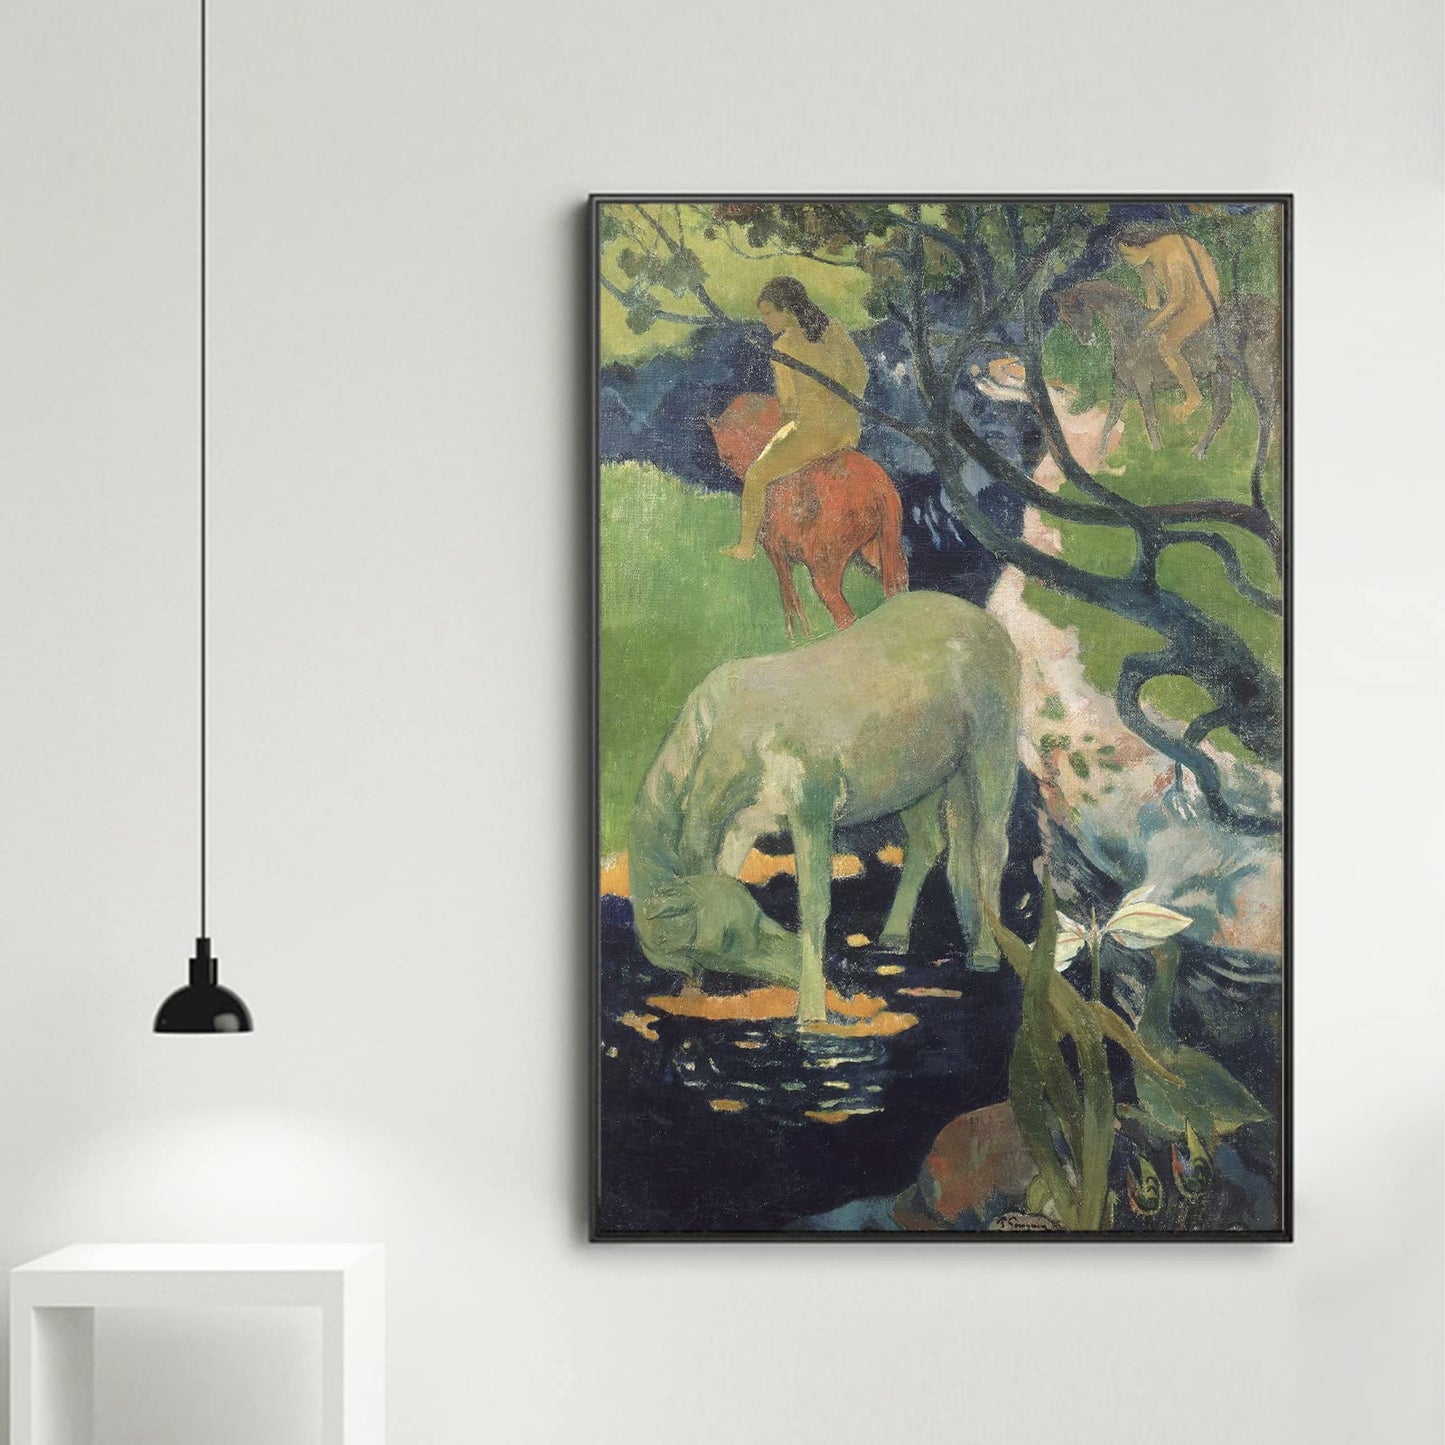 ZZPT Paul Gauguin Canvas Wall Art - The White Horse Print Poster - Famous Artist Fine Art Paintings Reproduction for Bedroom Office Wall Decor Unframed